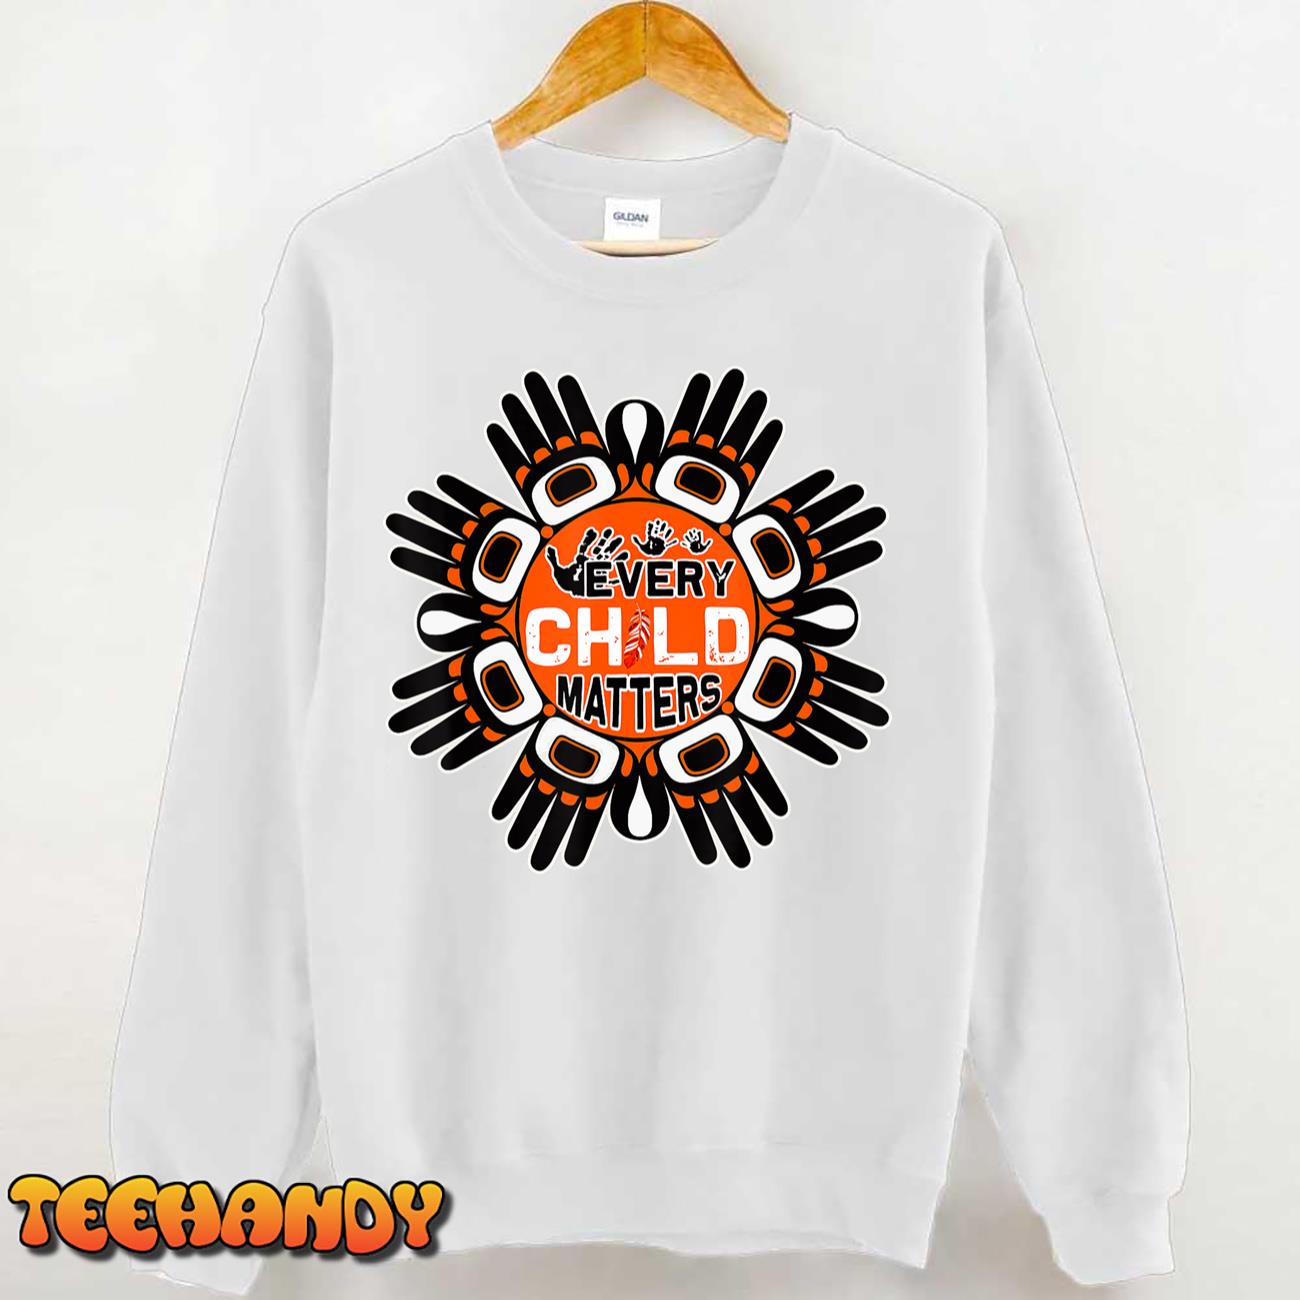 Every Child In Matters,Orange Day,Kindness & Equality T-Shirt